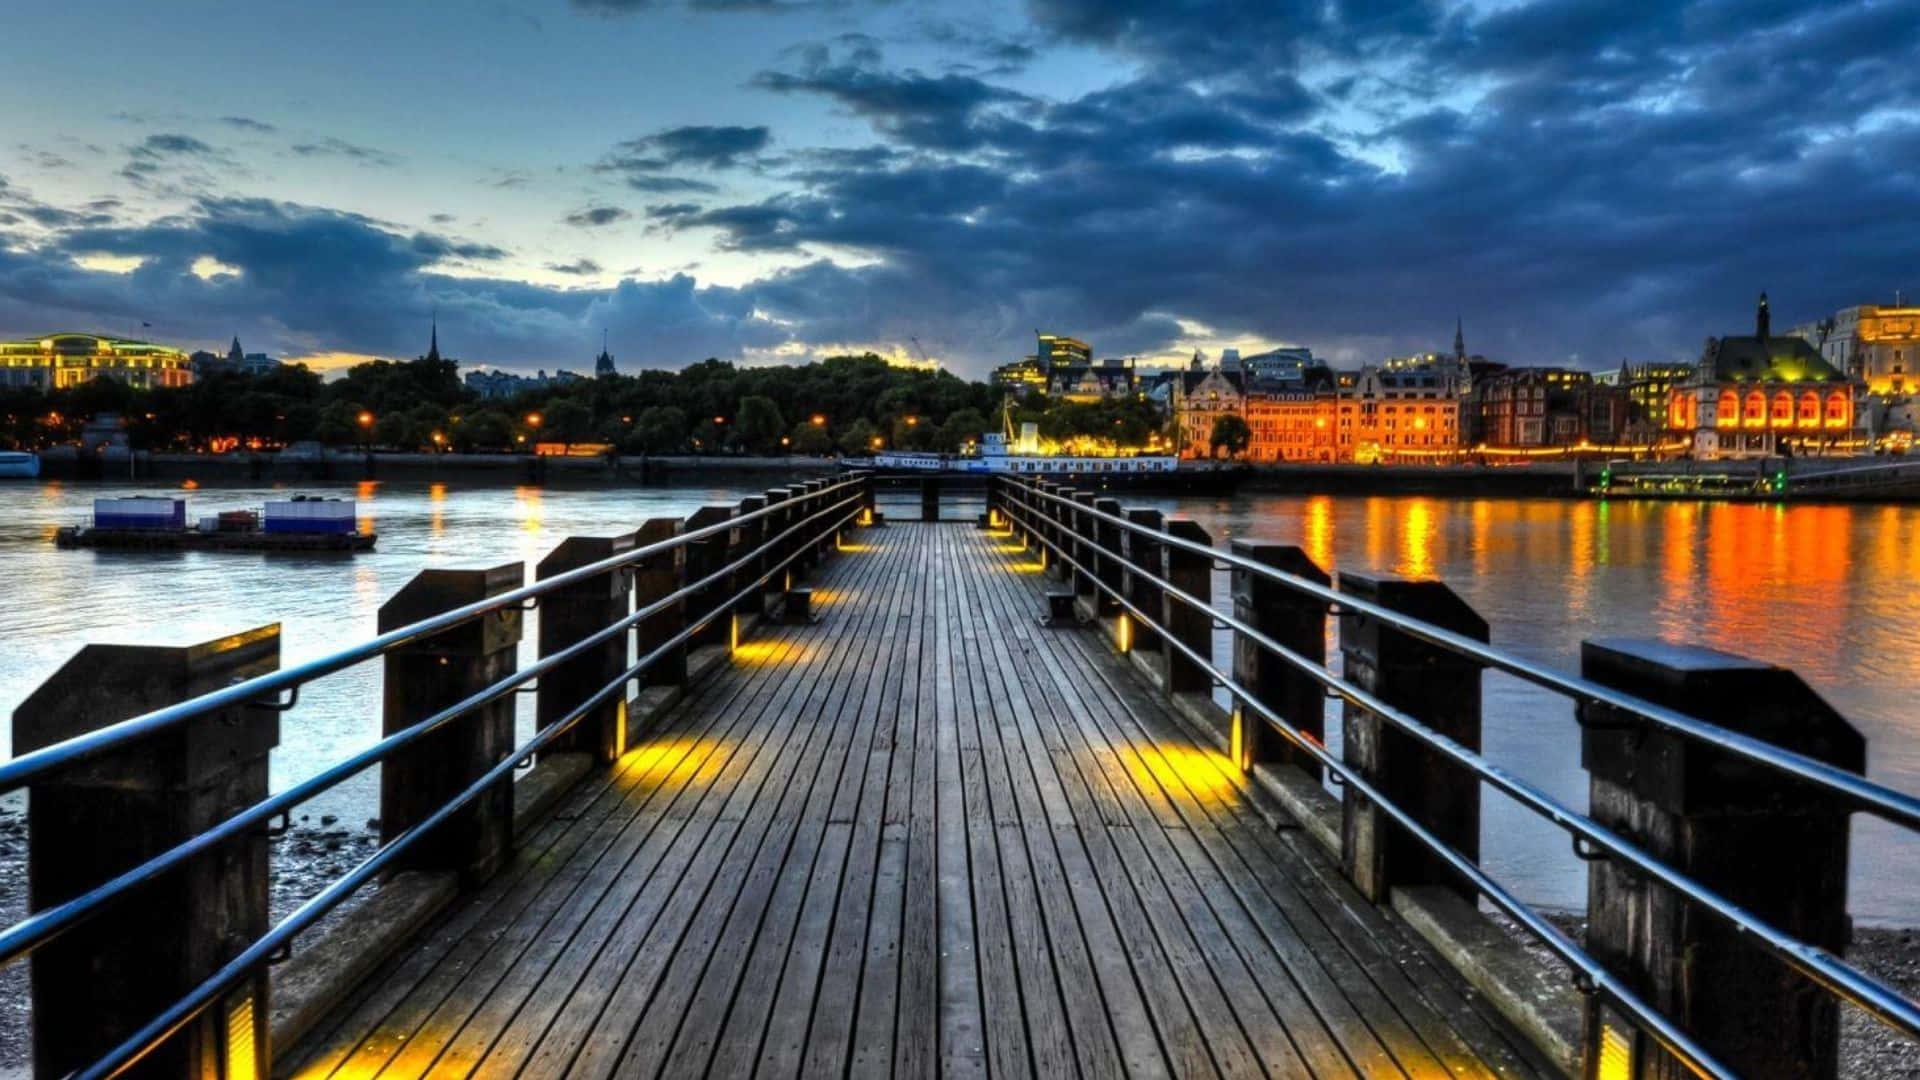 A Wooden Bridge Over A River At Night